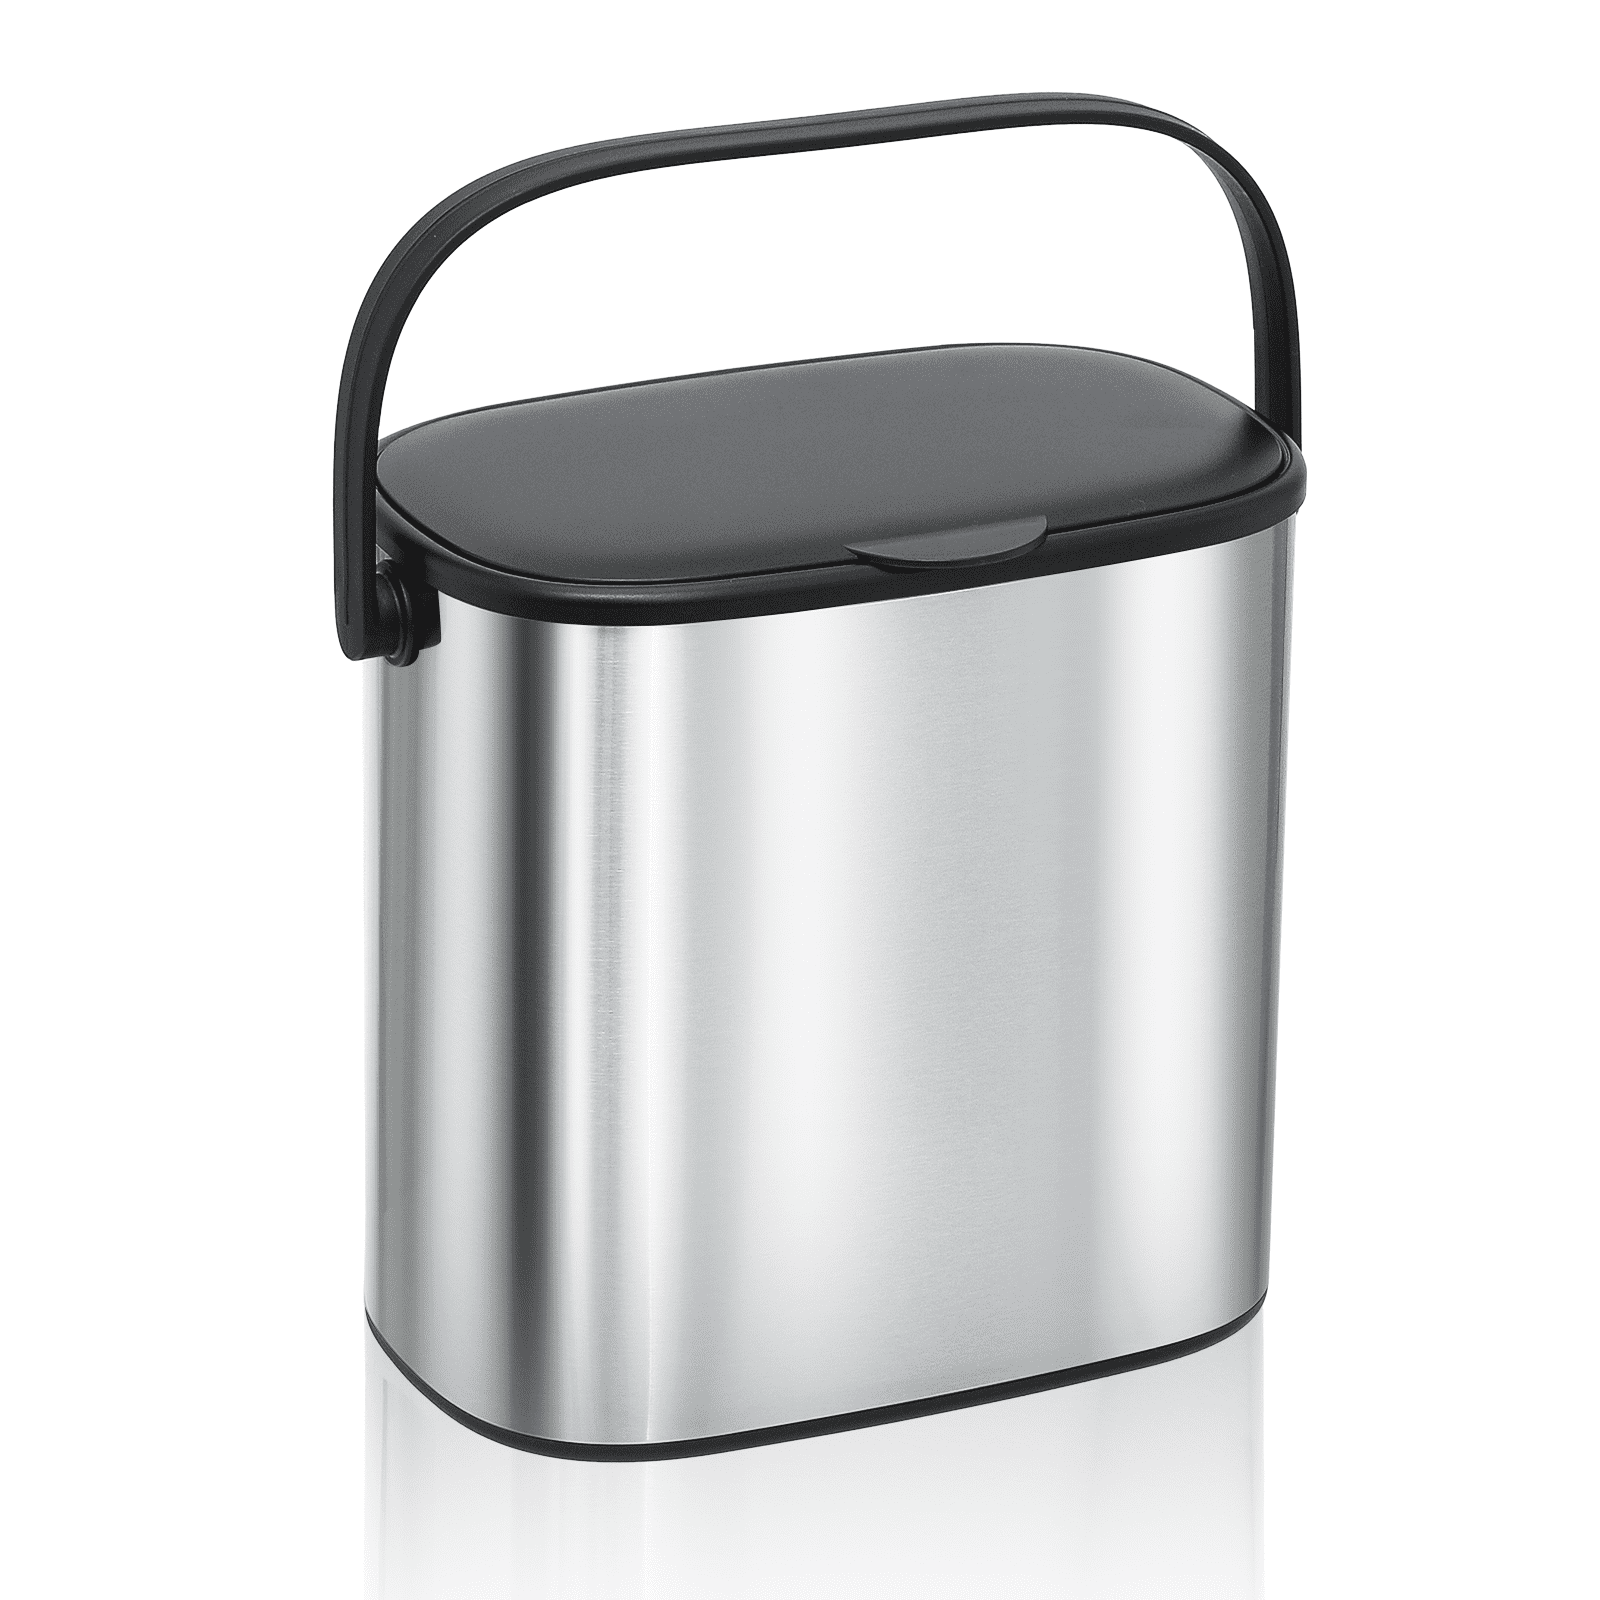 Atenow Compost Bin for Kitchen, 1.3 Gallon Stainless Steel Countertop  Compost Bin, Indoor Compost Bin with Extra Charcoal Filter, Kitchen  Mountable Food Waste Bin 